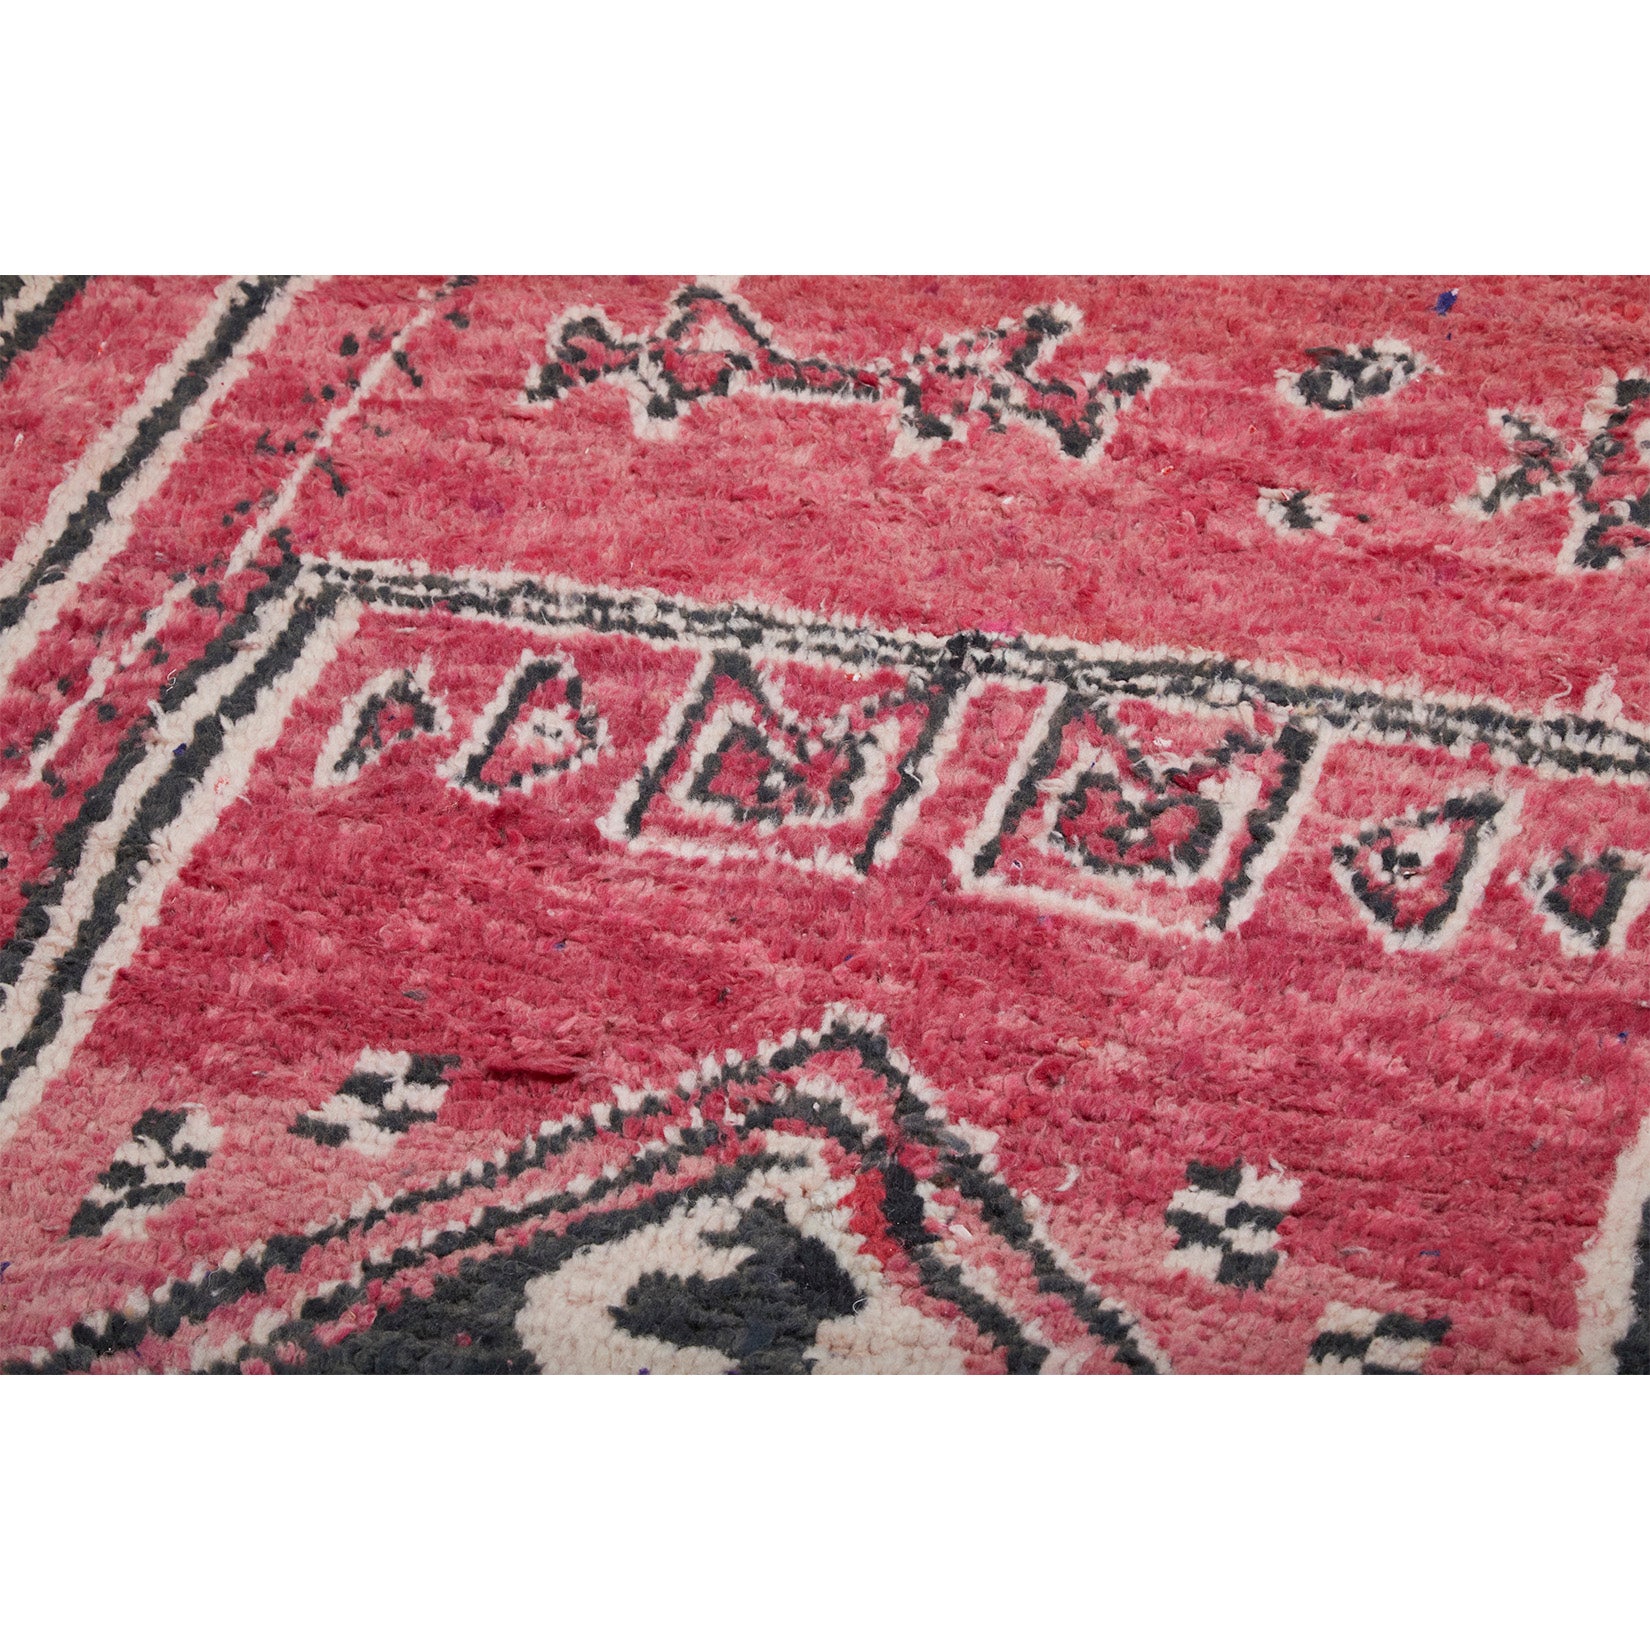 Authentic handknotted red berber rug - Kantara | Moroccan Rugs